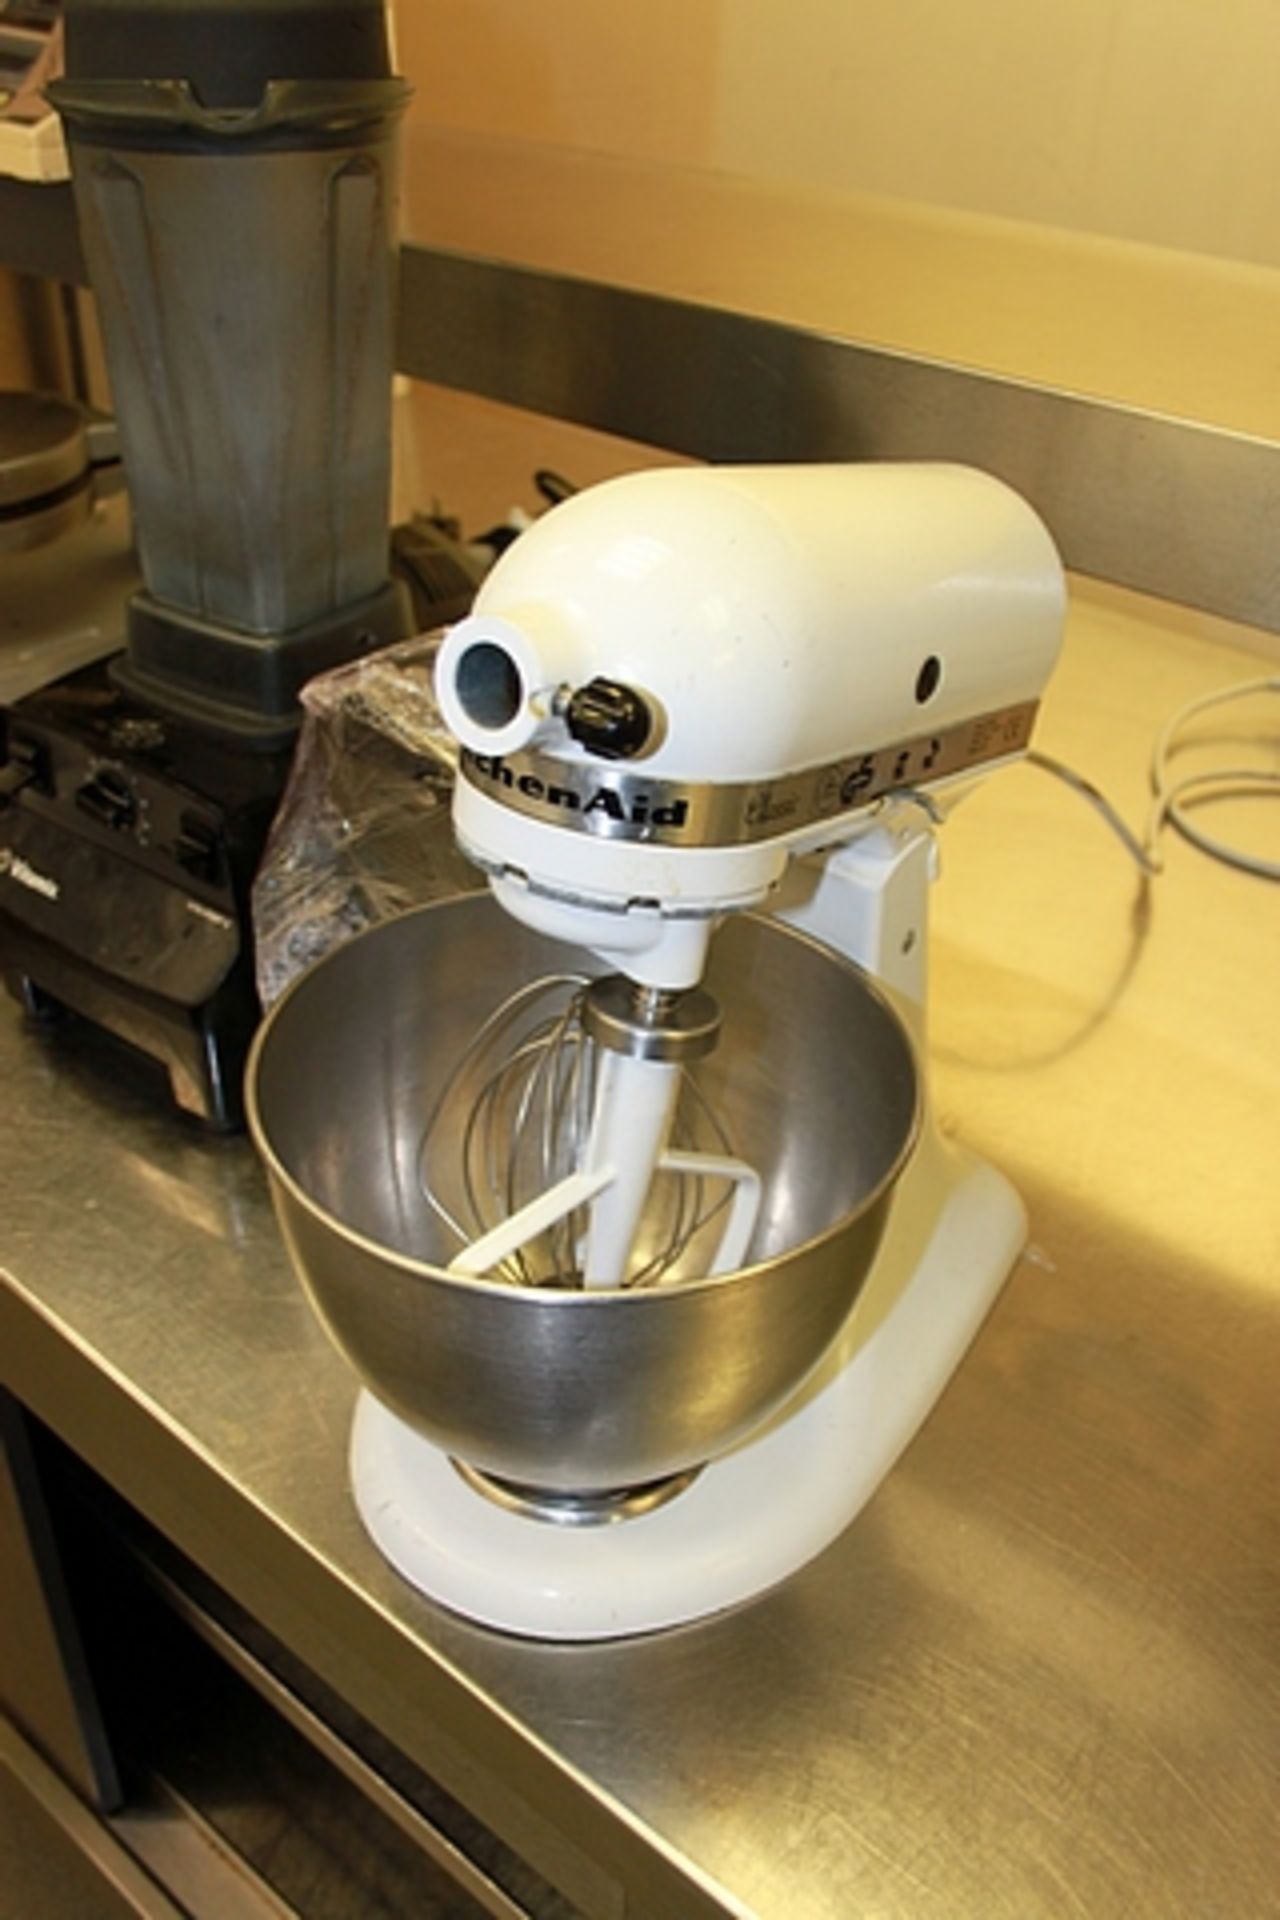 KitchenAid K45SS Classic Stand Mixer white direct drive motor with 10 speeds enhanced planetary - Image 2 of 2